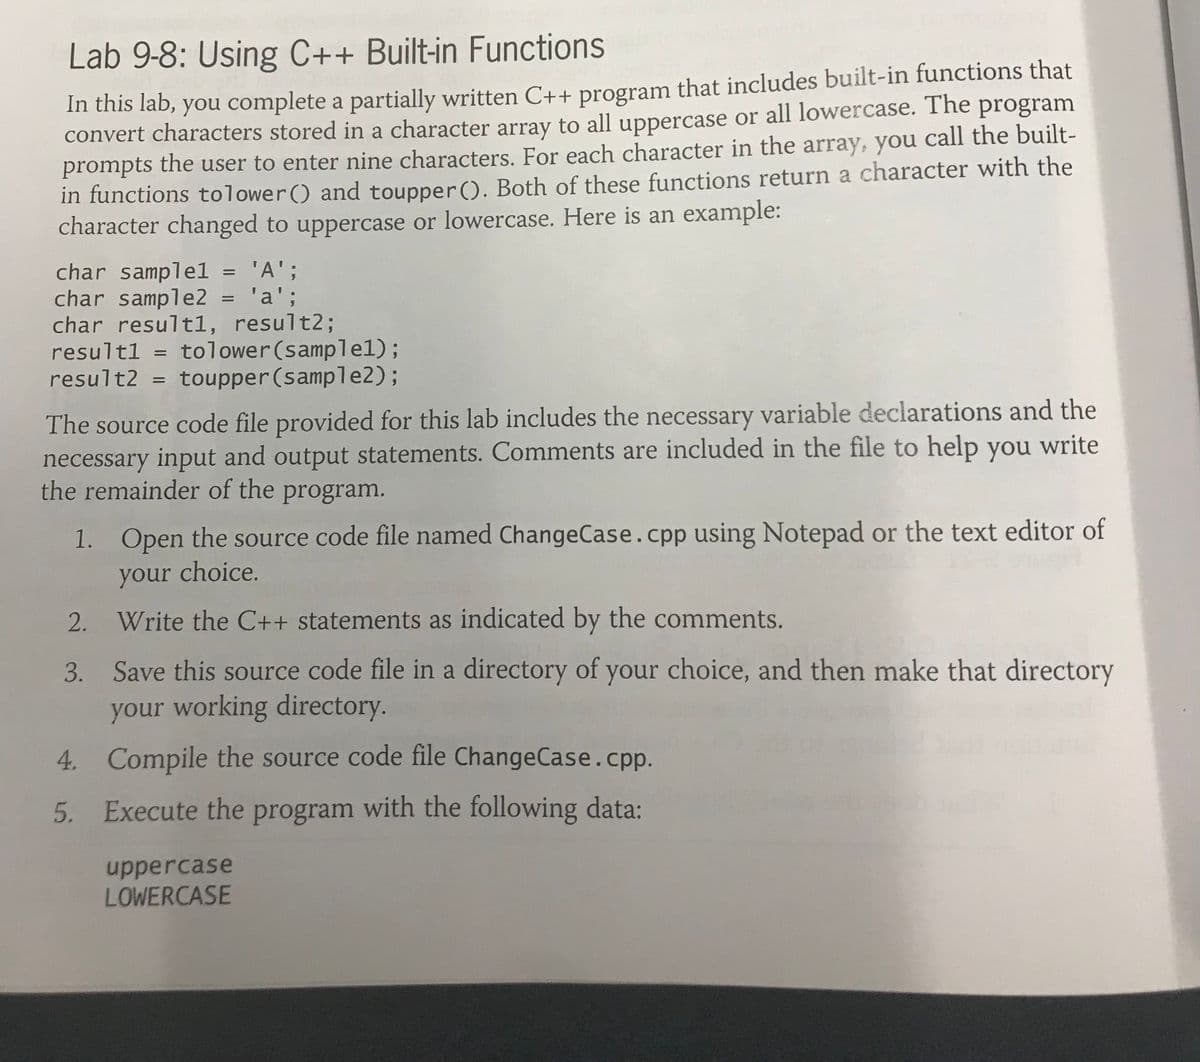 Lab 9-8: Using C++ Built-in Functions
In this lab, you complete a partially written C++ program that includes built-in functions that
convert characters stored in a character array to all uppercase or all lowercase. The program
prompts the user to enter nine characters. For each character in the array, you call the built-
in functions tolower() and toupper(). Both of these functions return a character with the
character changed to uppercase or lowercase. Here is an example:
char samplel = 'A';
char sample2
char result1, result%3;
resultl = tolower(samplel);
result2 = toupper (sample2);
%3D
'a';
The source code file provided for this lab includes the necessary variable declarations and the
necessary input and output statements. Comments are included in the file to help you write
the remainder of the program.
1. Open the source code file named ChangeCase.cpp using Notepad or the text editor of
your choice.
2. Write the C++ statements as indicated by the comments.
3. Save this source code file in a directory of your choice, and then make that directory
your working directory.
4. Compile the source code file ChangeCase.cpp.
5. Execute the program with the following data:
uppercase
LOWERCASE
